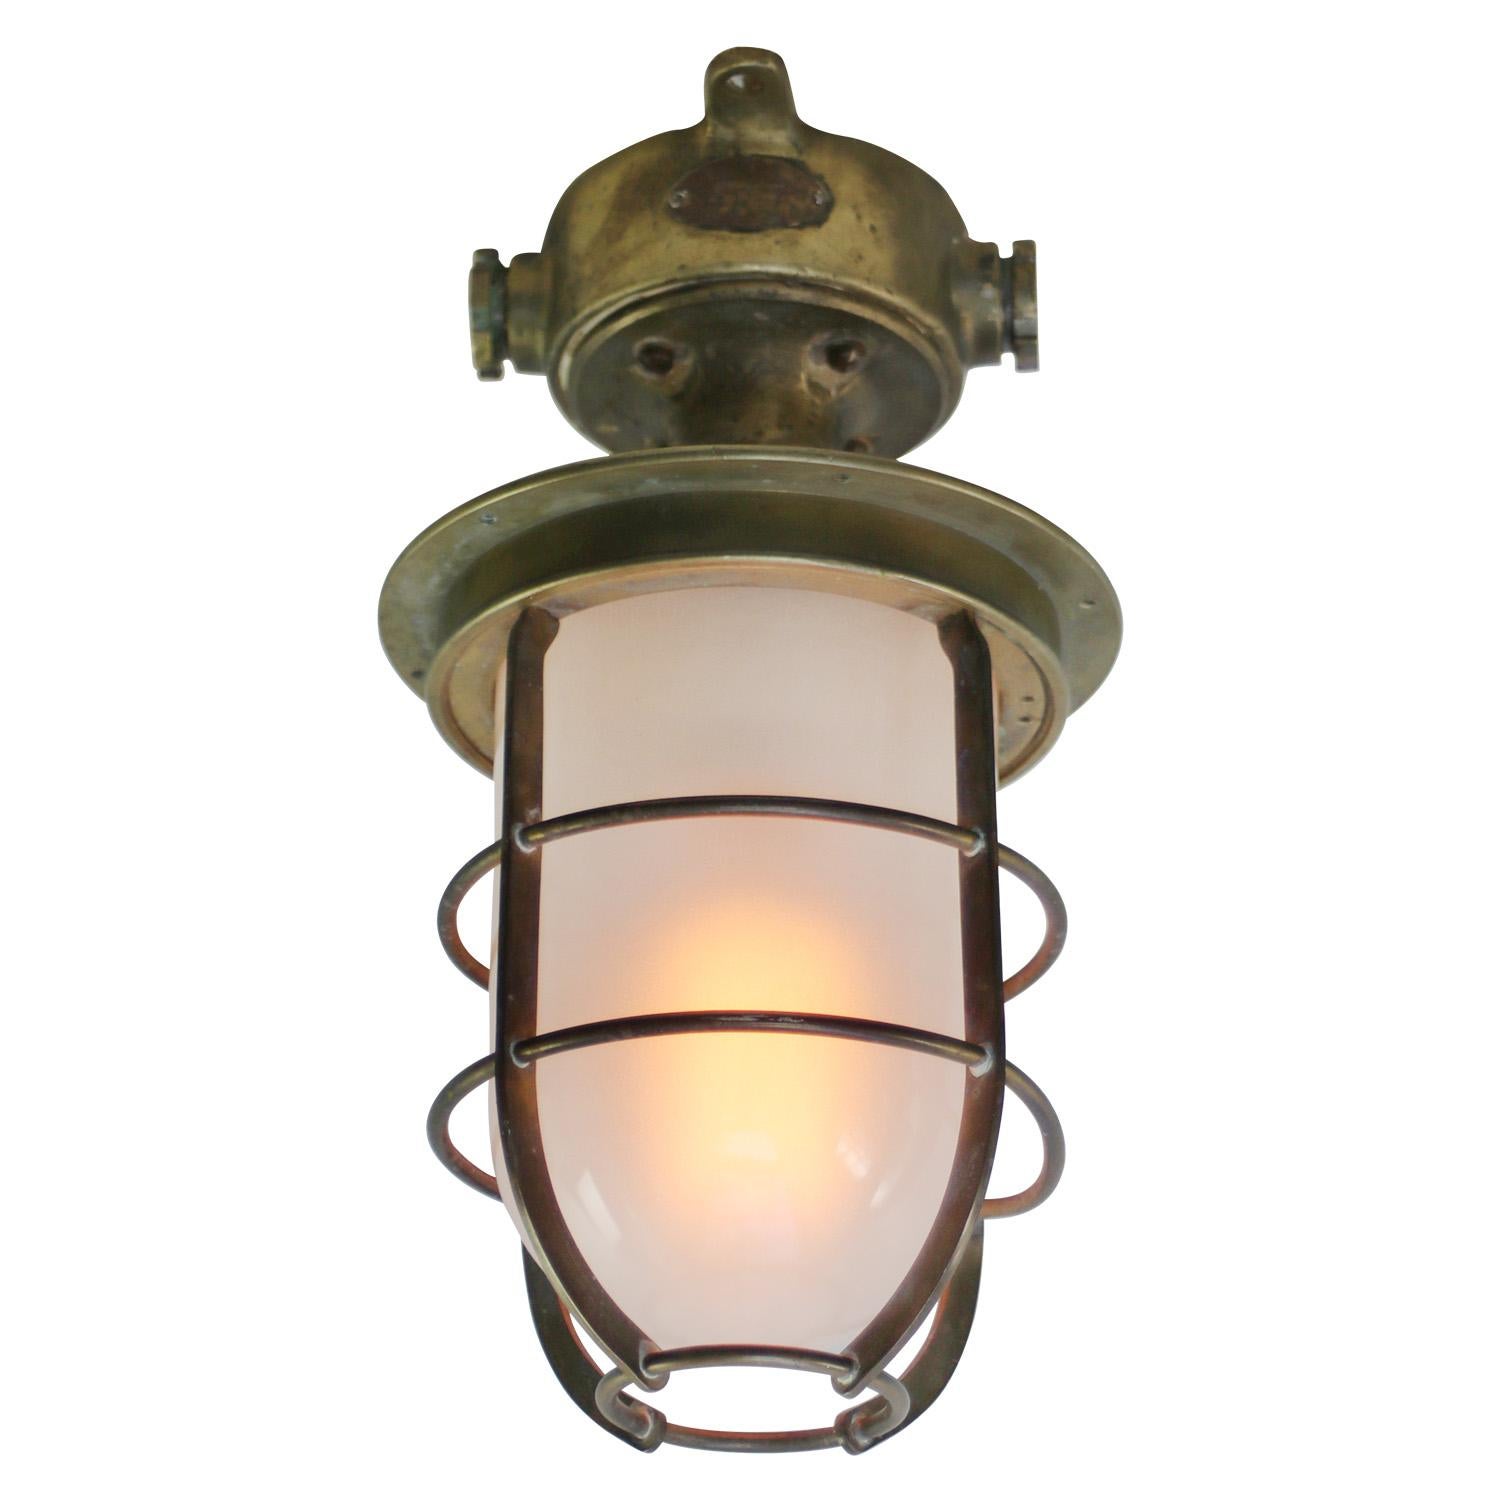 French Copper Opaline Glass Vintage Industrial Nautical Ceiling Light Flush Mount